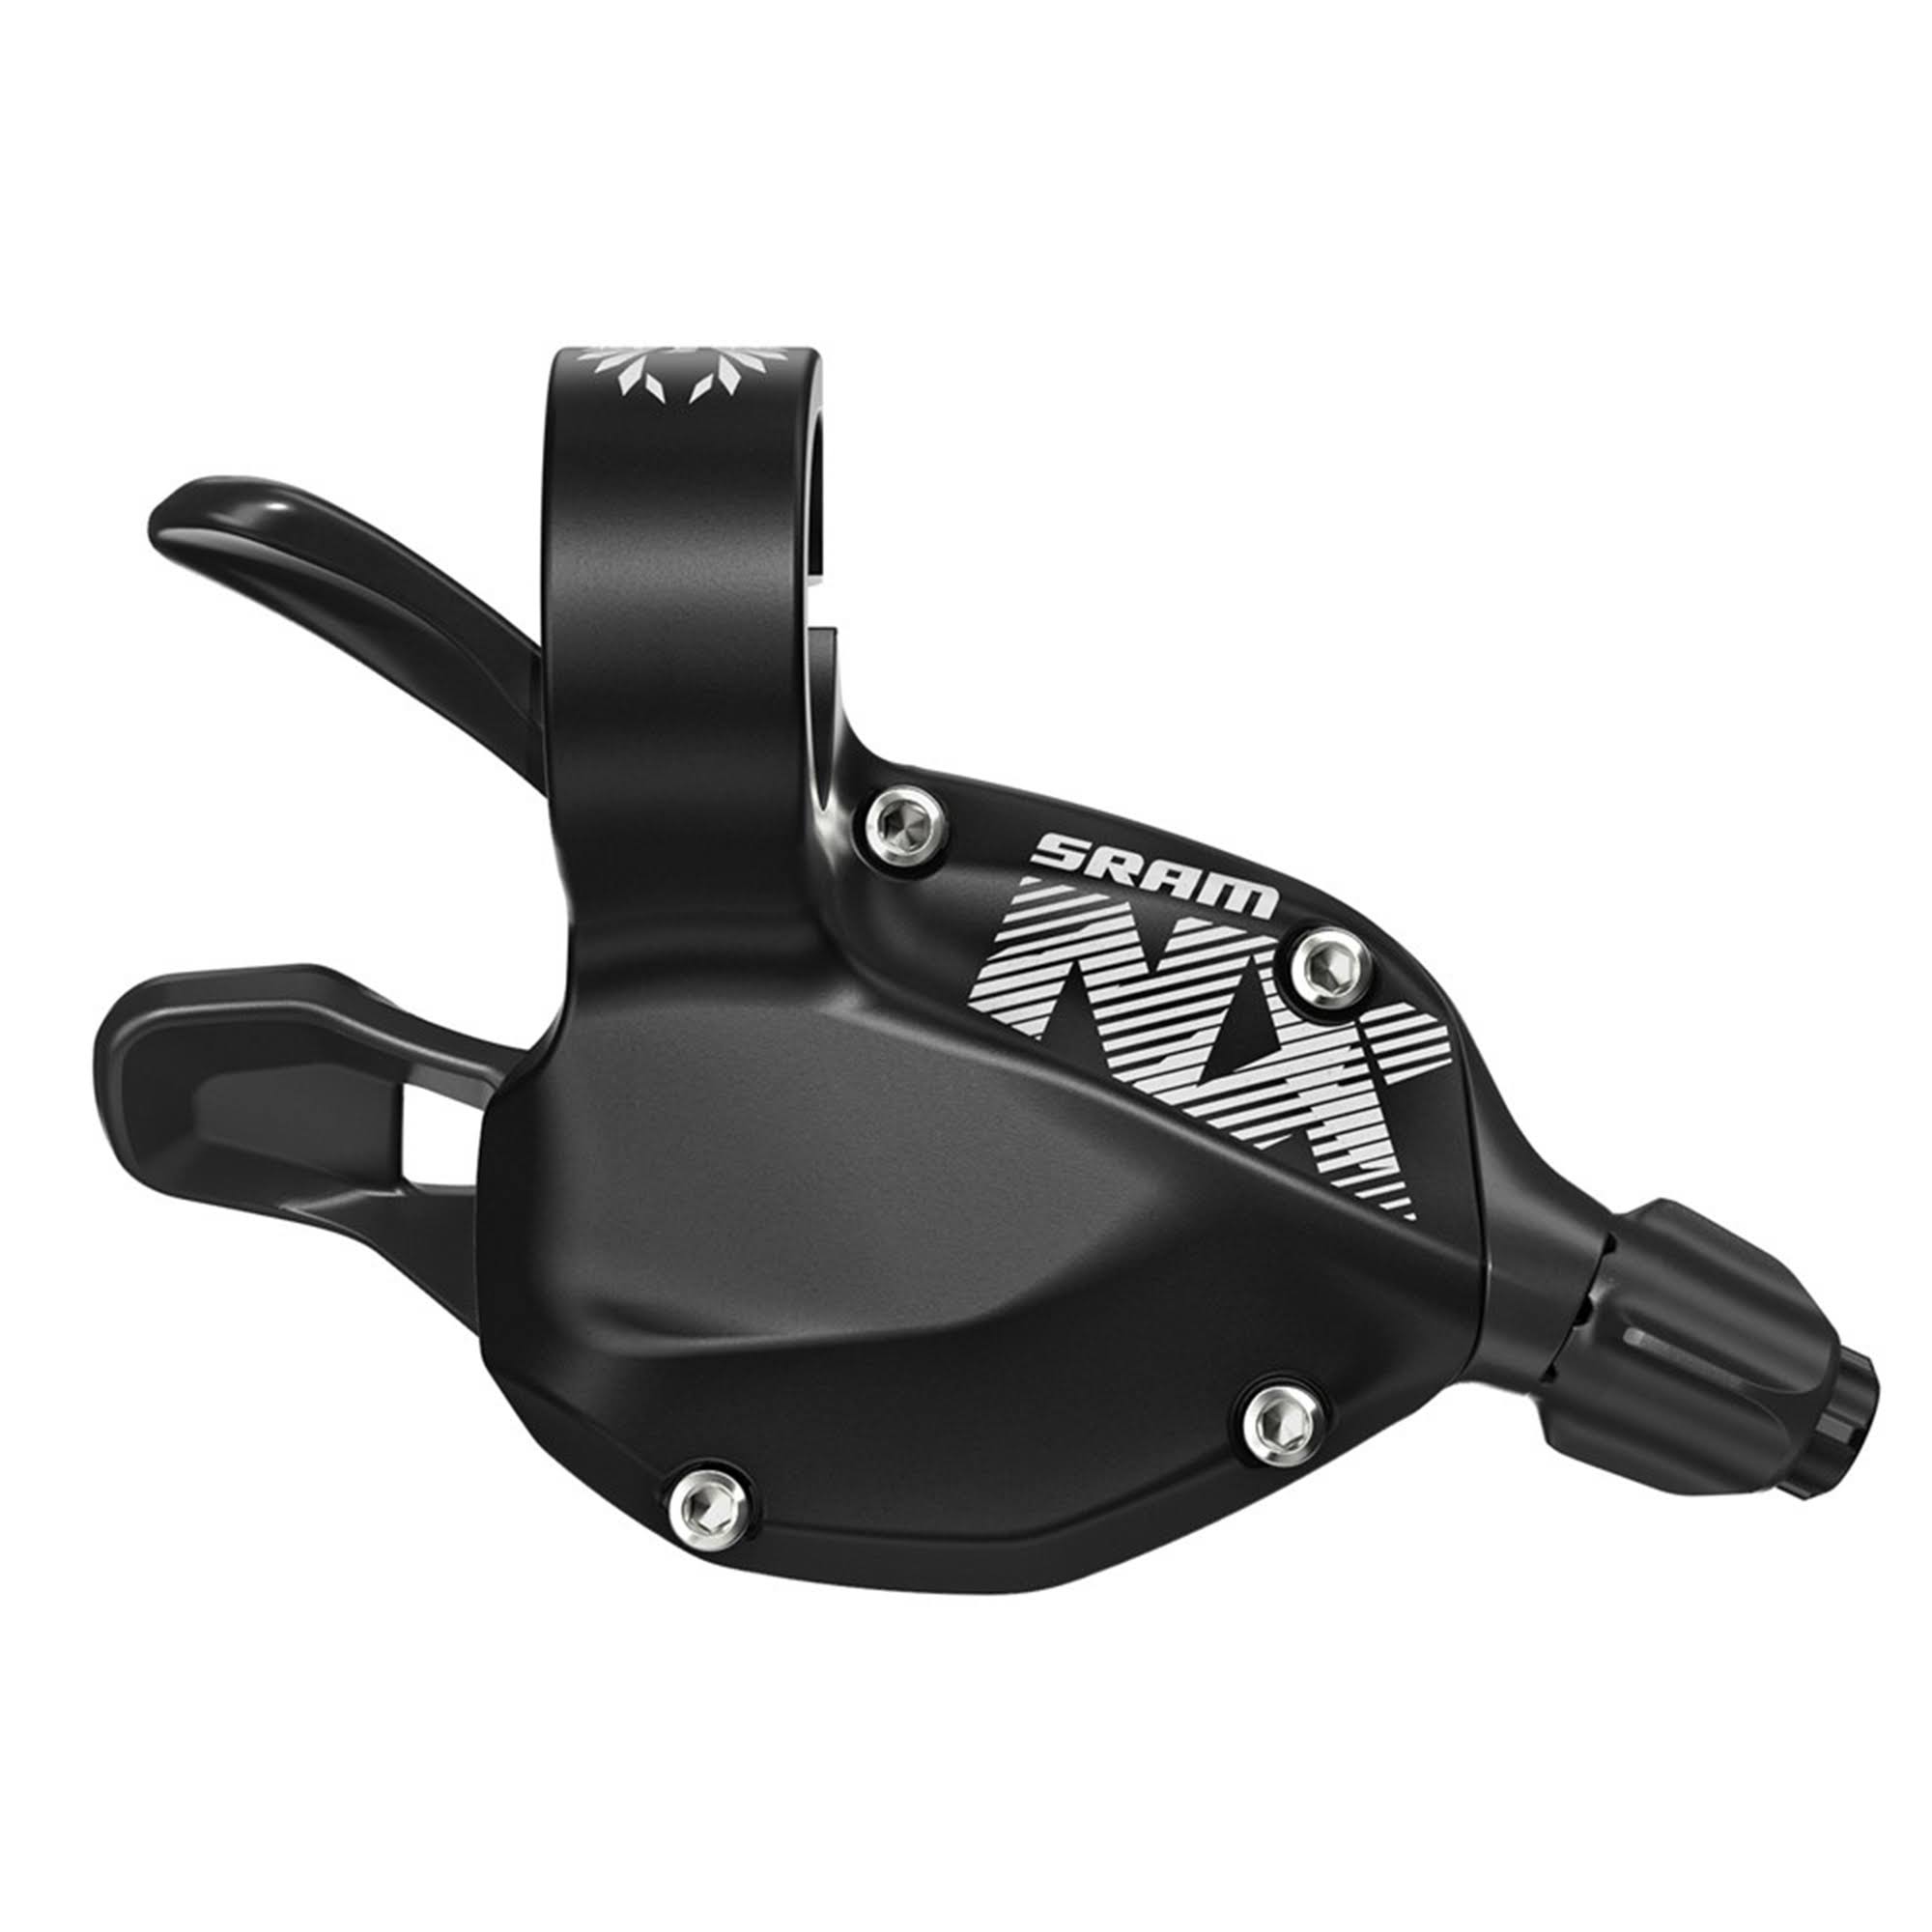 Sram NX Eagle Trigger Shifter - with Discrete Clamp, Black, 12 Speed